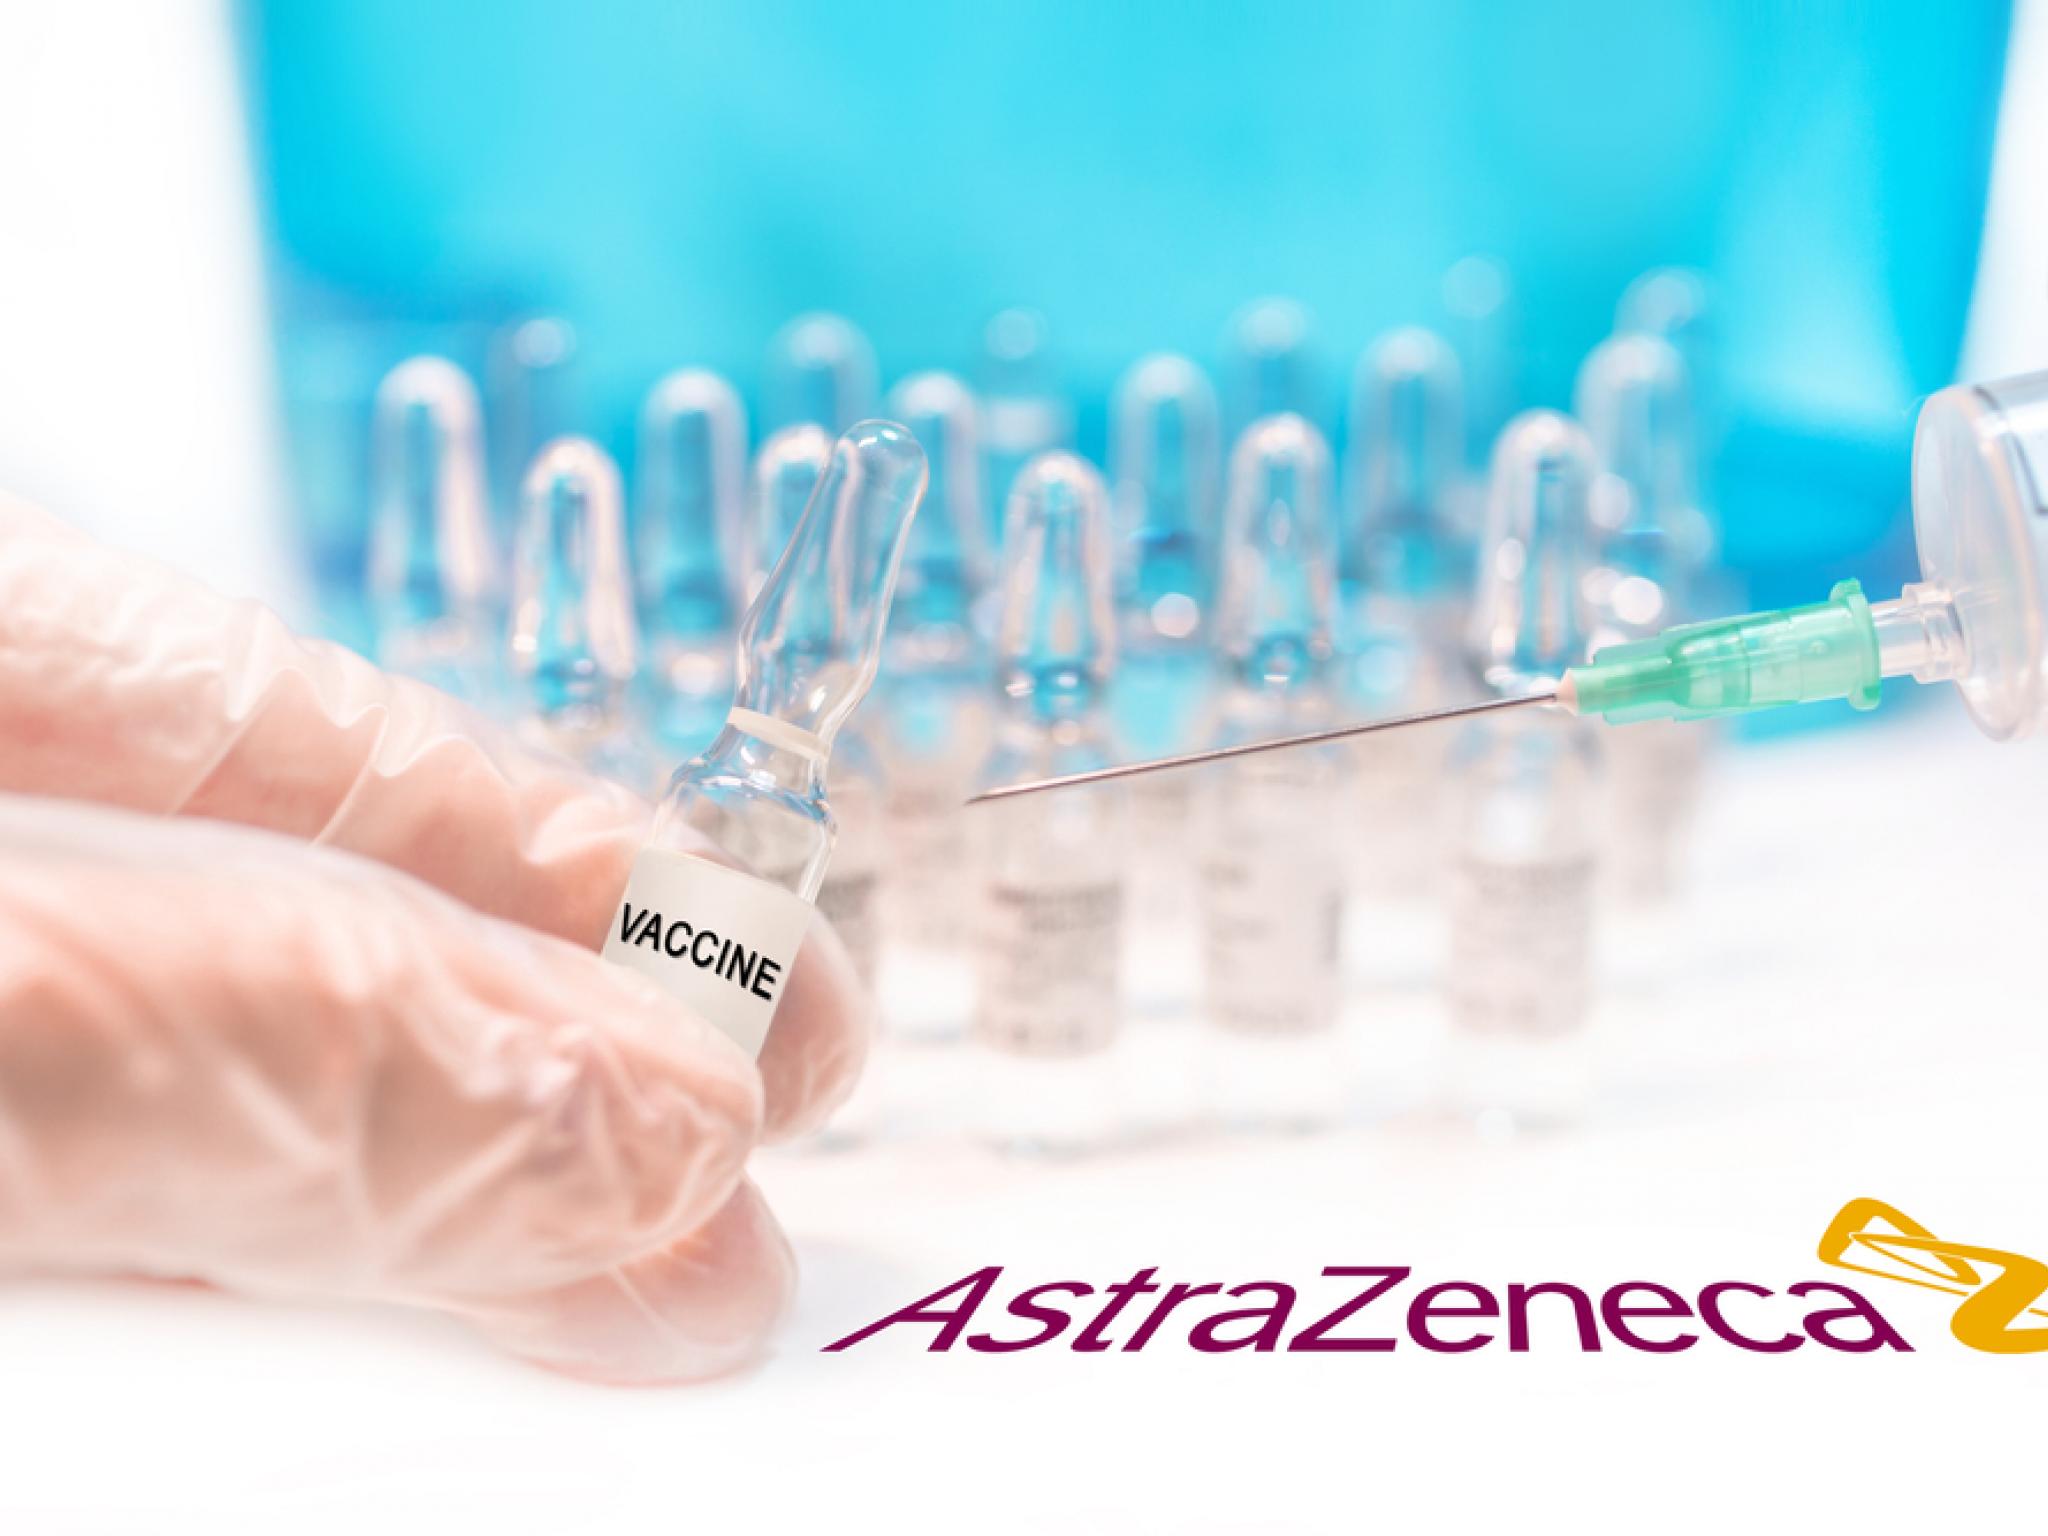  astrazenecas-covid-19-prevention-therapy-cuts-risk-of-infection-in-patients-with-weaker-immunity-data-shows 